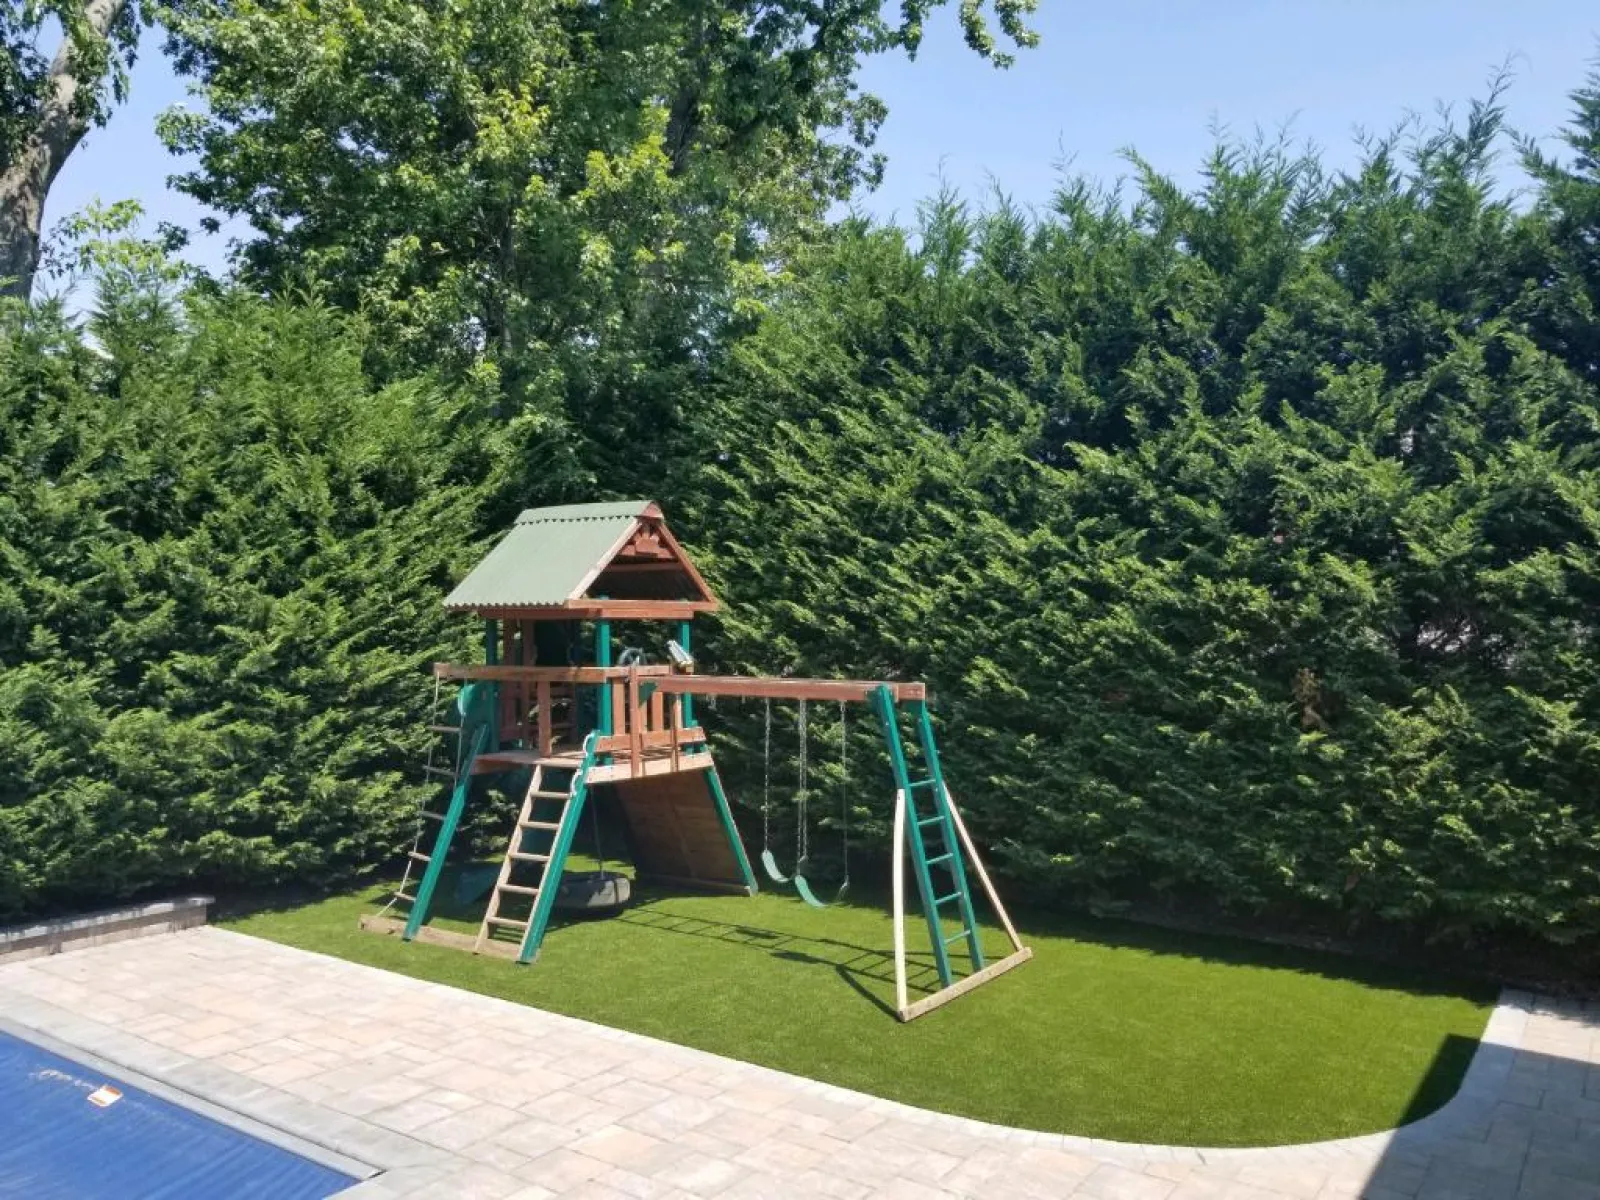 a play structure in a backyard